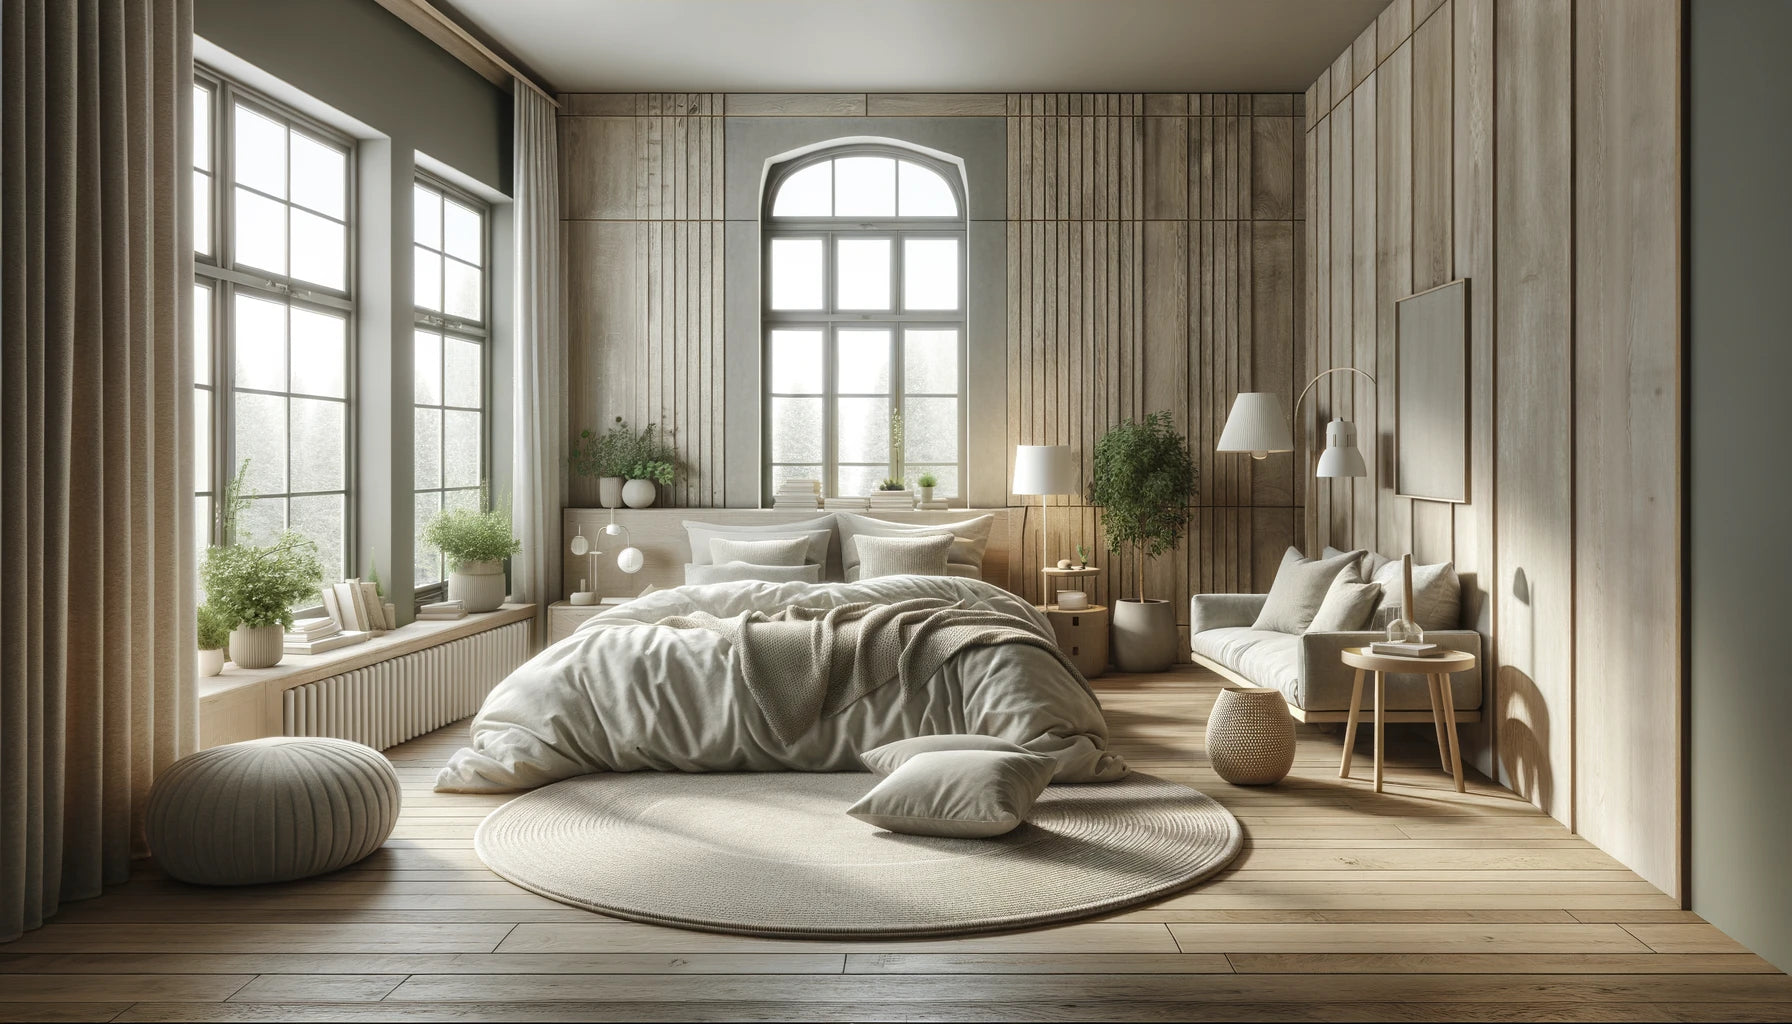 DALL·E 2024-02-23 15.26.47 - Generate a landscape-oriented image of a bedroom designed in a North European style. The room exudes a minimalist yet cozy atmosphere, characteristic .webp__PID:f053c8fa-7c2f-4186-9371-85b460920975